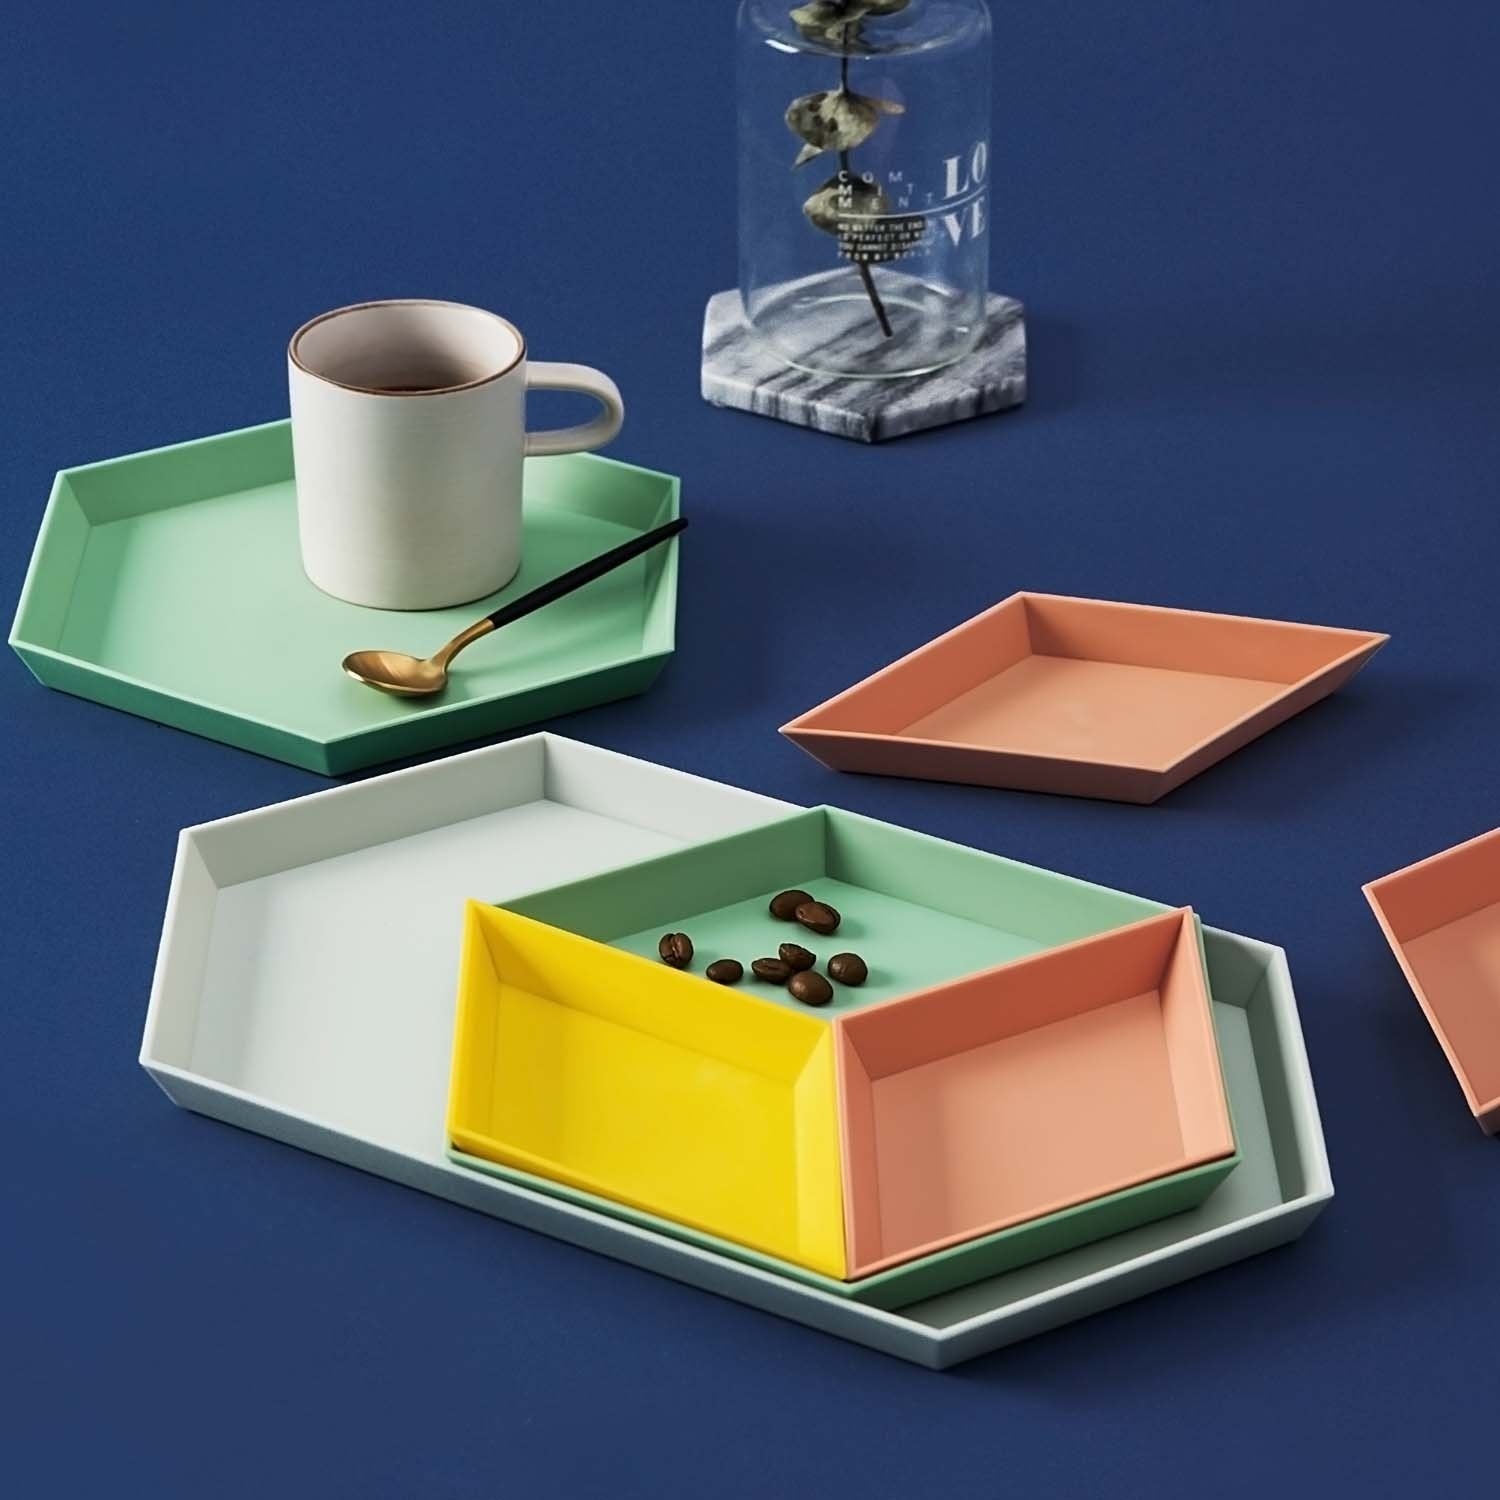 The storage trays are shown on a tabletop